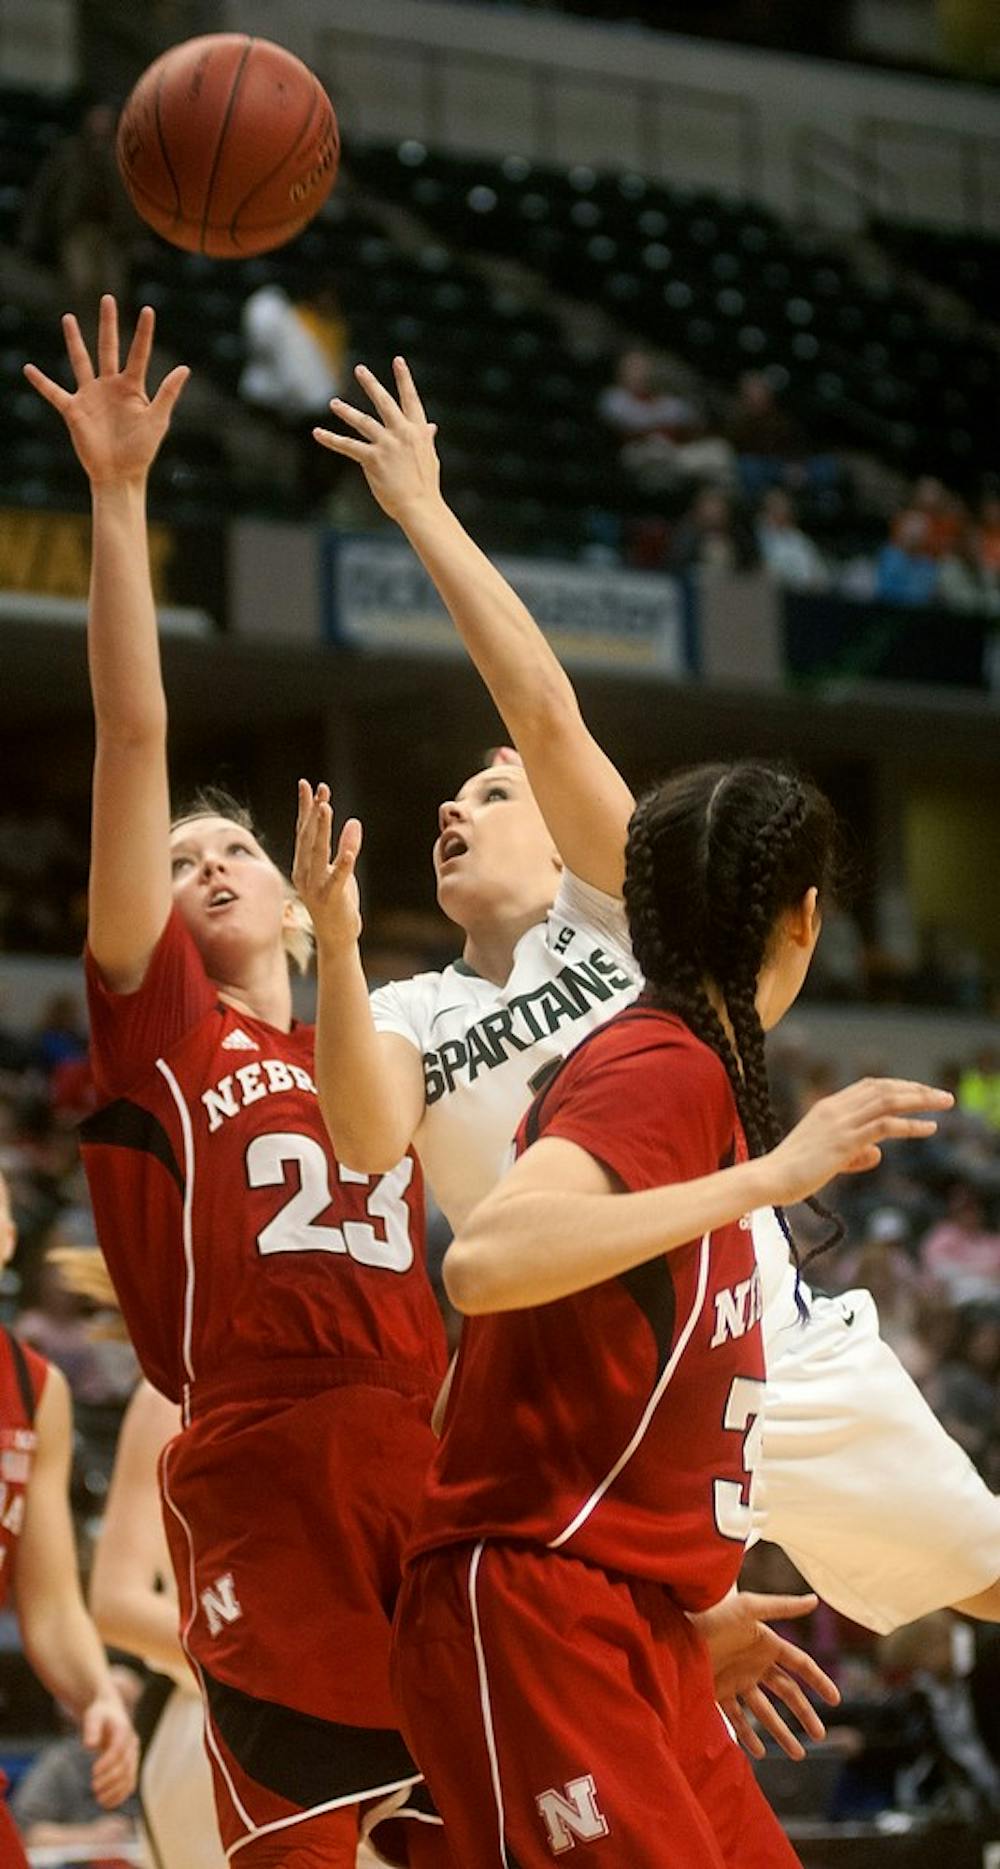 <p>Freshman guard Tori Jankoska shoots the ball while defended by Nebraska forward Emily Cady on March 8, 2014, at Bankers Life Fieldhouse in Indianapolis. The Spartans were defeated, 86-58, and will not advance to the Big 10 Championship. Betsy Agosta/The State News</p>